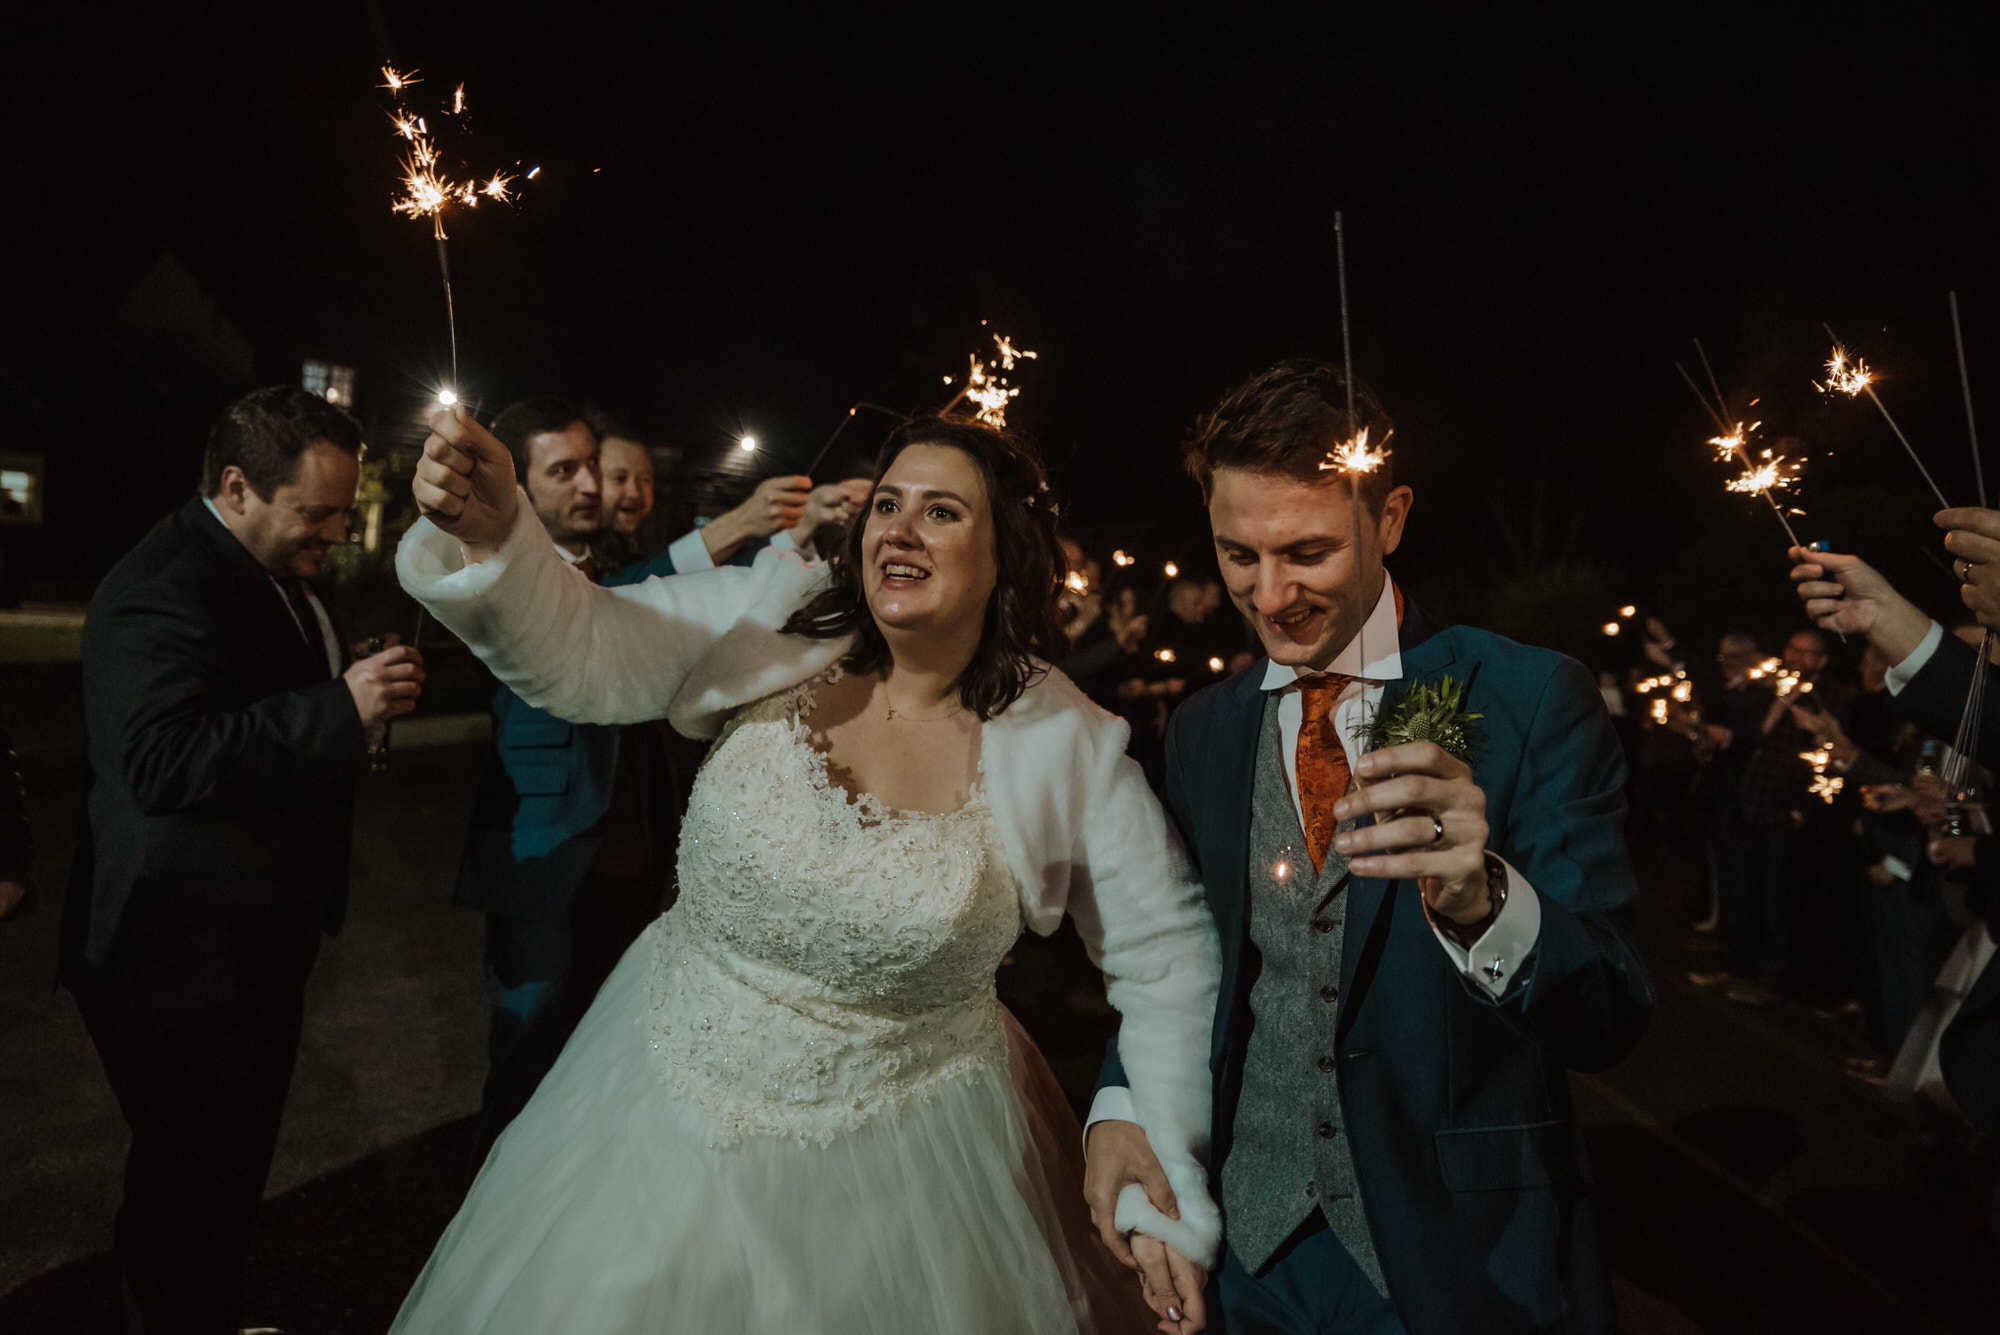 Sparklers exit for the bride ad groom at the reception Roshni photography The Milling Barn, Bluntswood Hall, Throcking wedding photographer